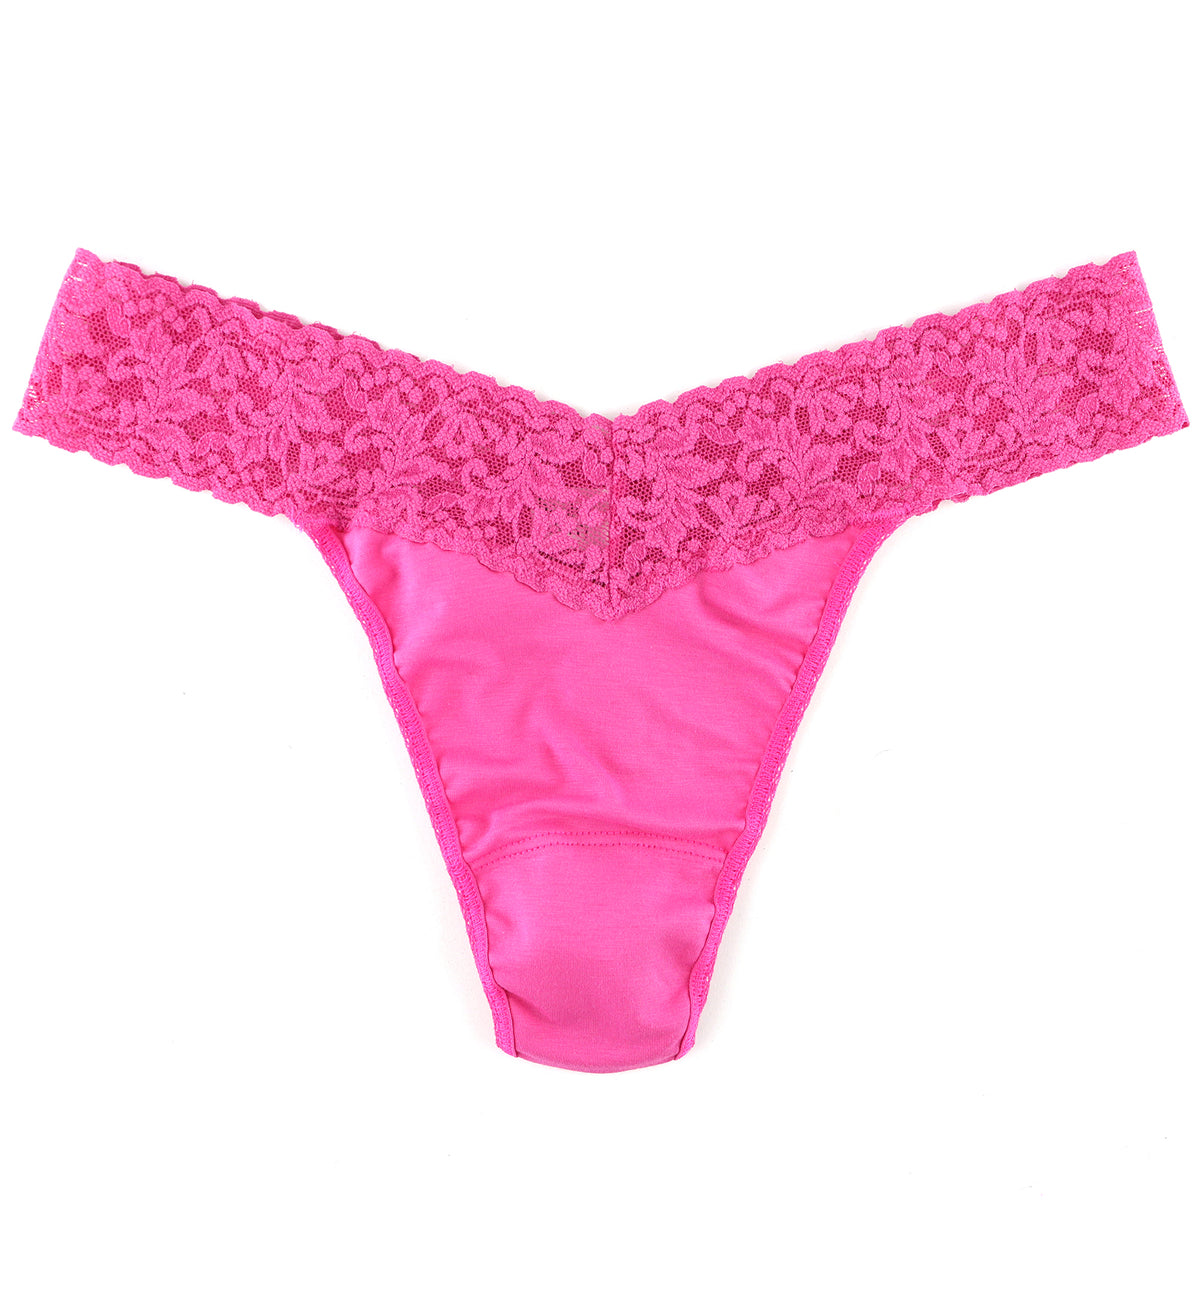 Hanky Panky Original Rise Organic Cotton Thong with Lace (891801),Wild Pink - Wild Pink,One Size